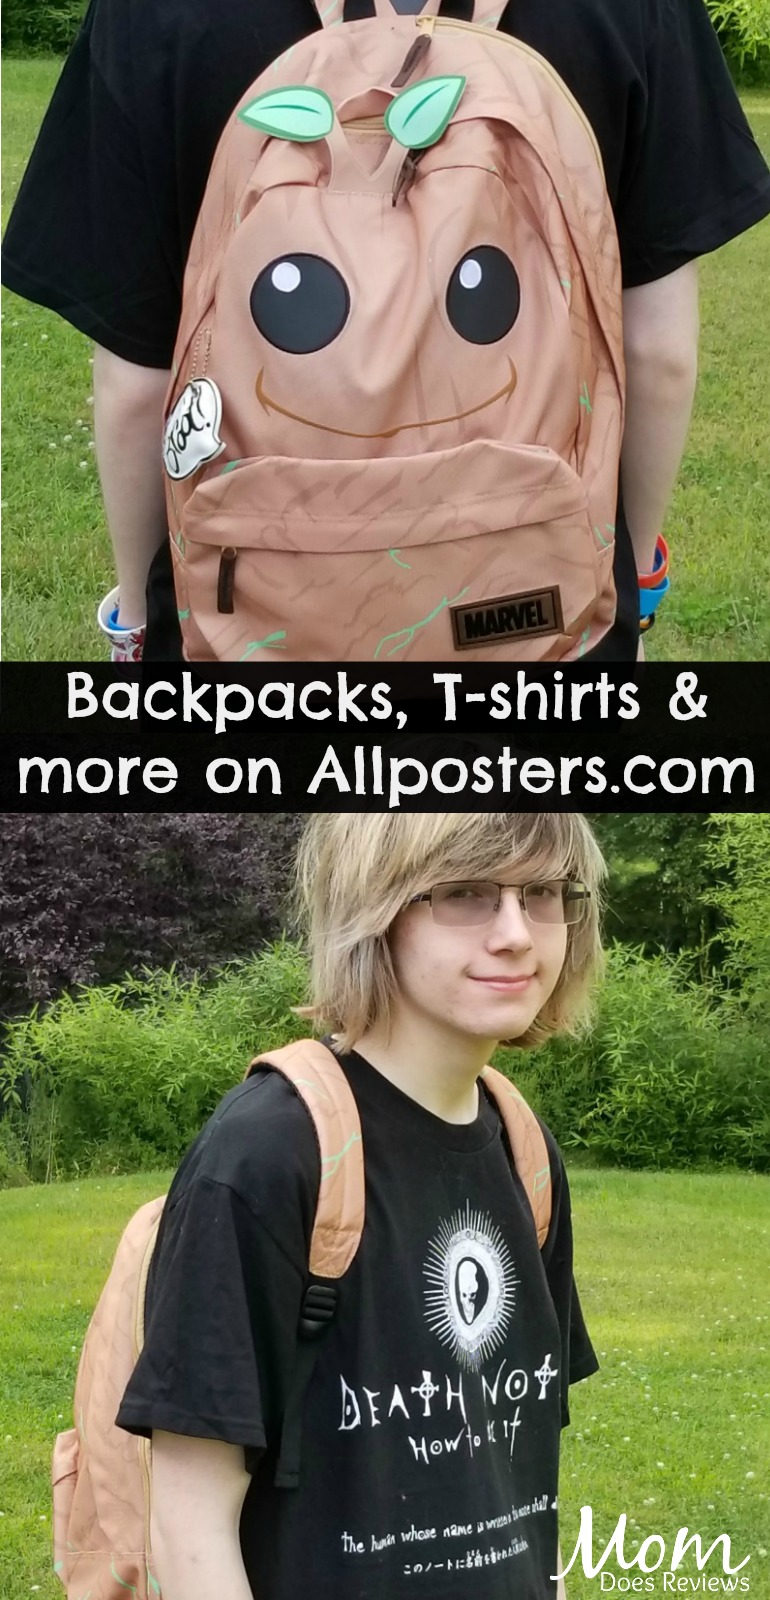 AllPosters.com has fun apparel for Back-to-School